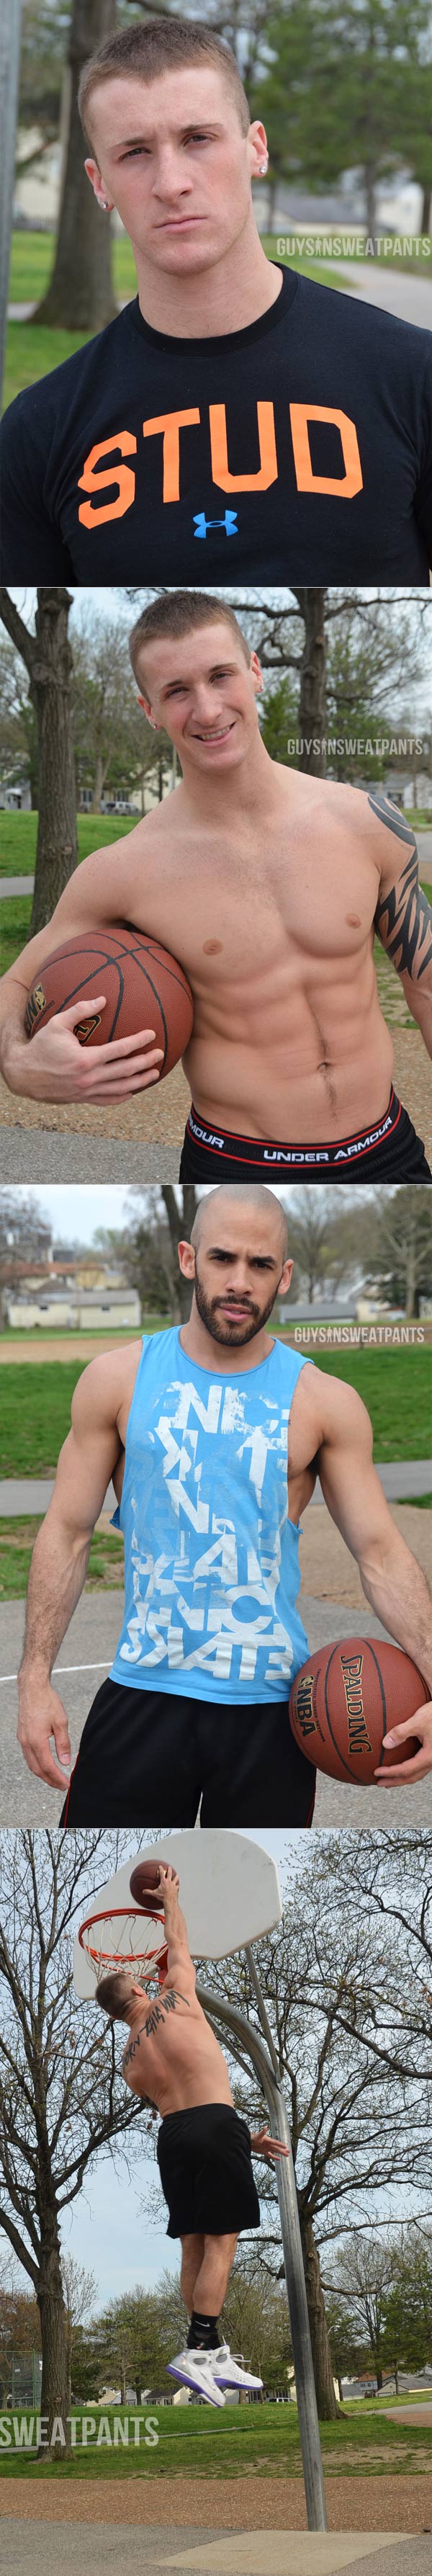 The Game (Austin Wilde & Connor Kline) at Guys In Sweatpants